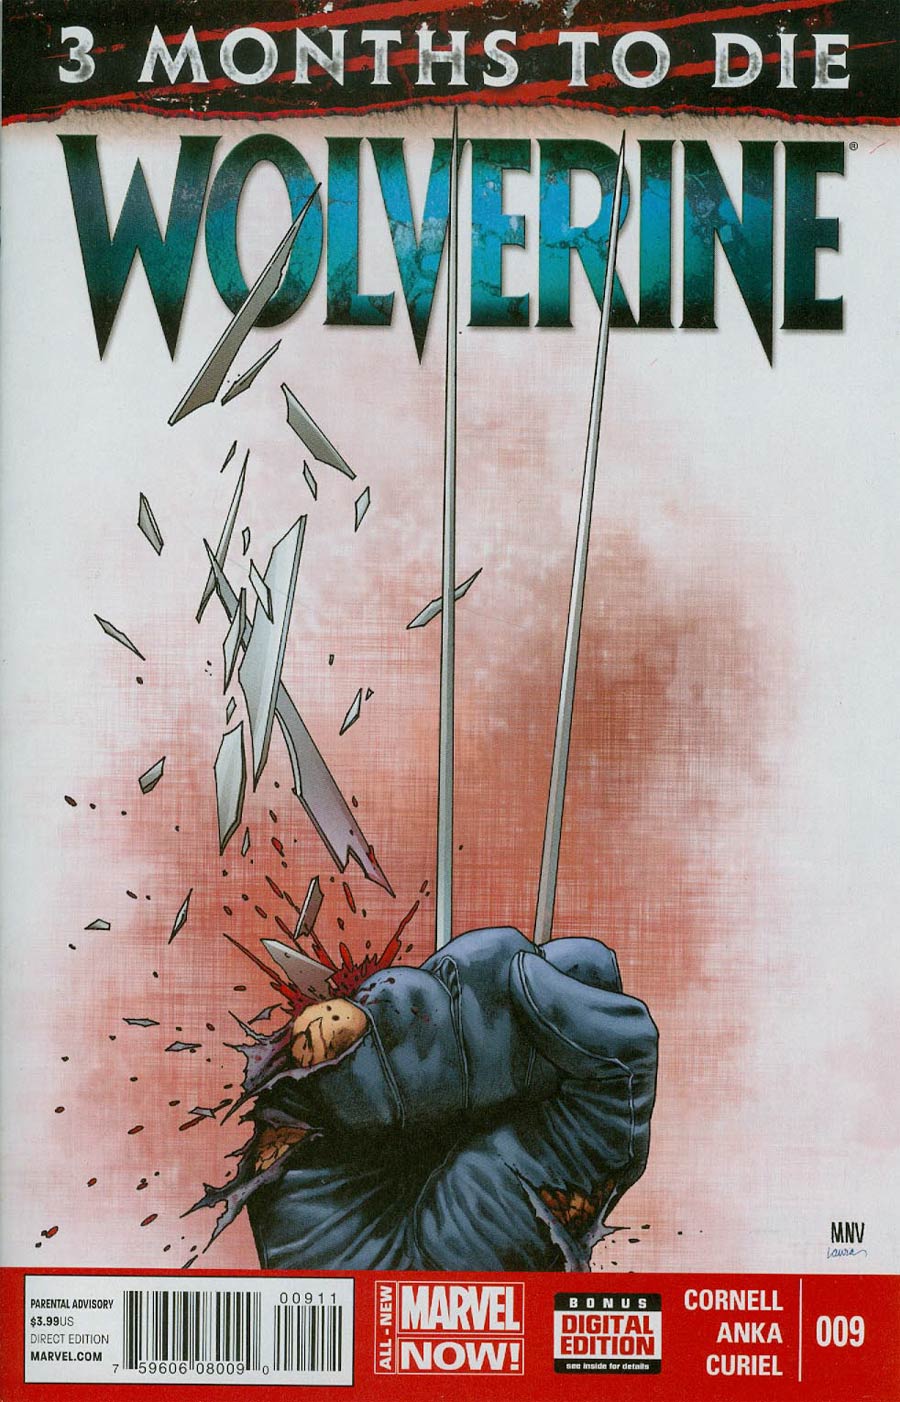 Wolverine Vol 6 #9 Cover A 1st Ptg Regular Steve McNiven Cover (3 Months To Die Part 2)